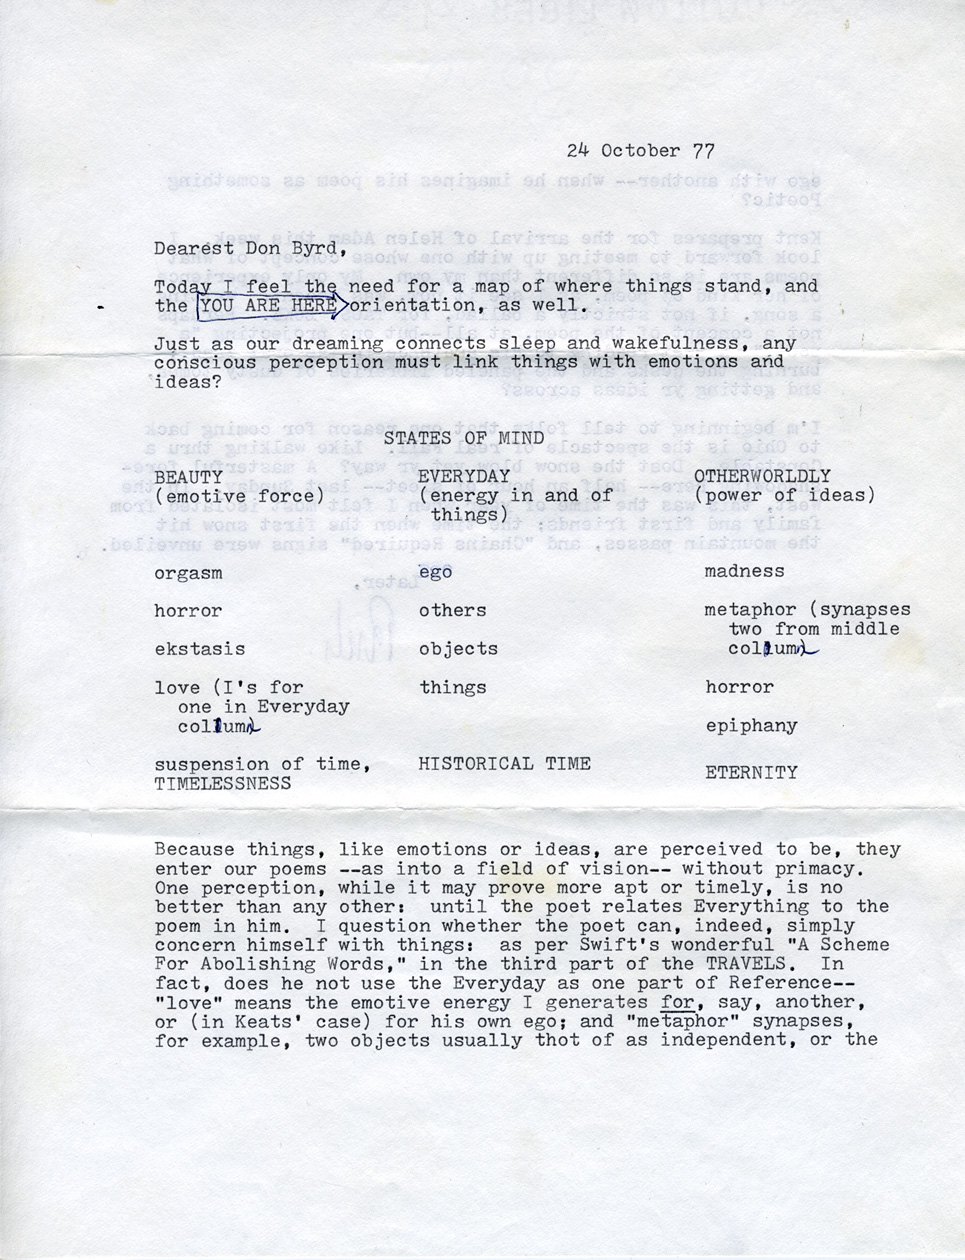 Richard Blevins letter to Don Byrd, 1st of 2 pages, October 24, 1977. From the Don Byrd Archive located at TK.